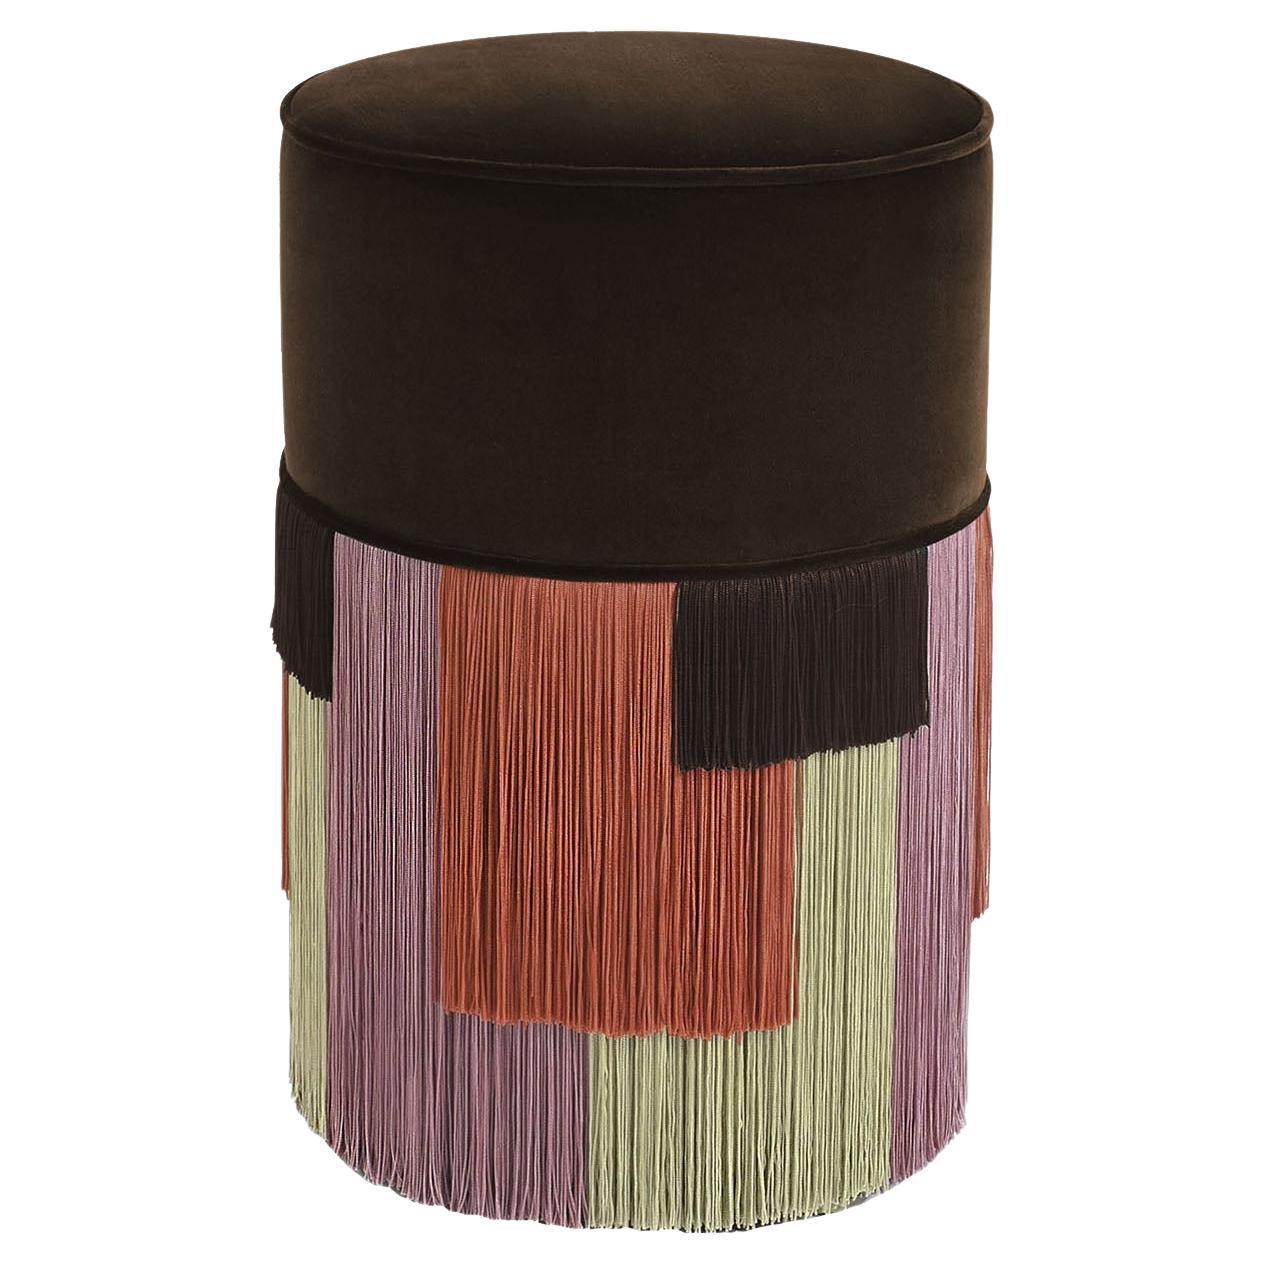 Couture Brown Pouf with Geometric Fringe by Lorenza Bozzoli Design